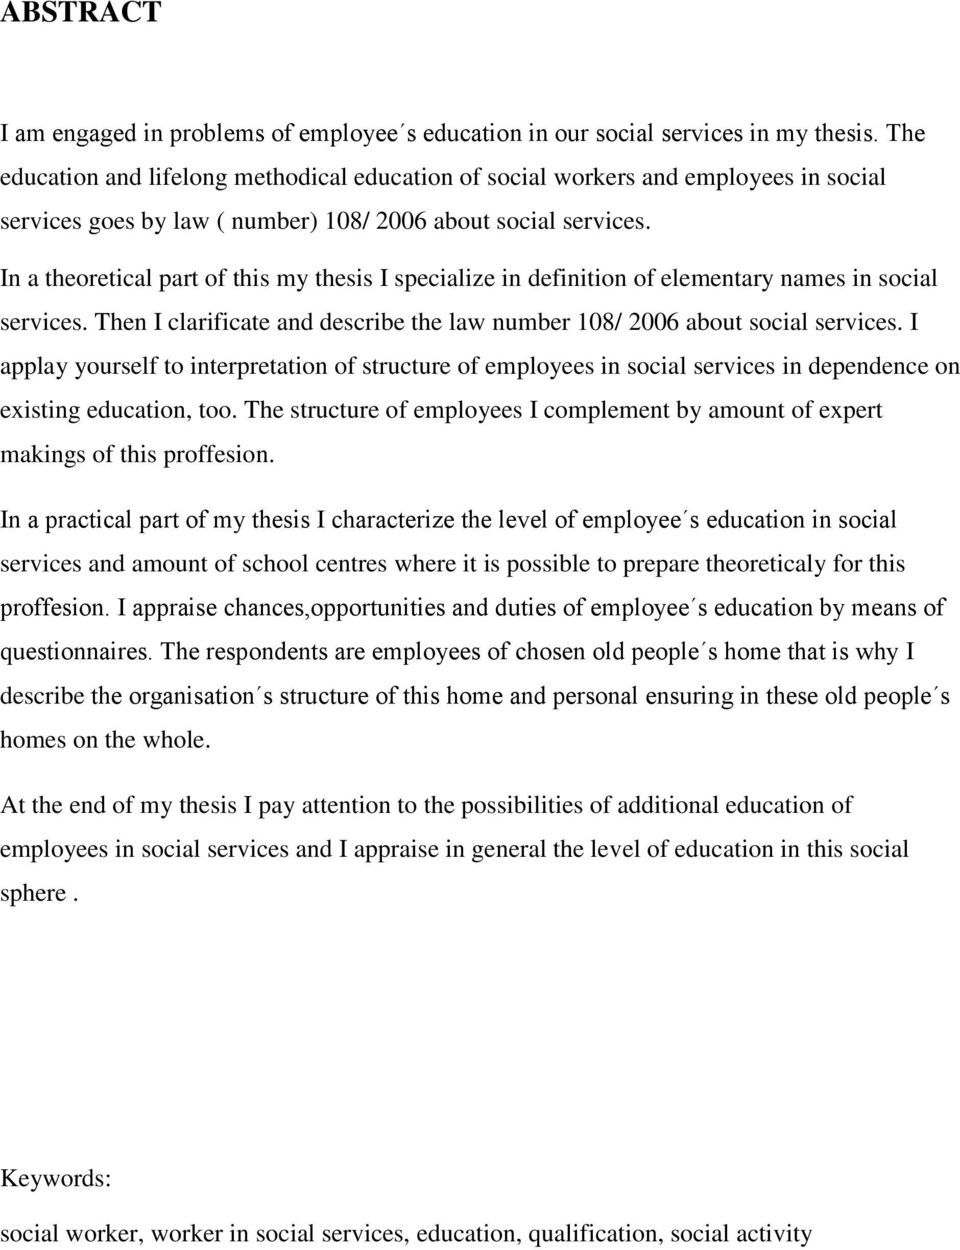 In a theoretical part of this my thesis I specialize in definition of elementary names in social services. Then I clarificate and describe the law number 108/ 2006 about social services.